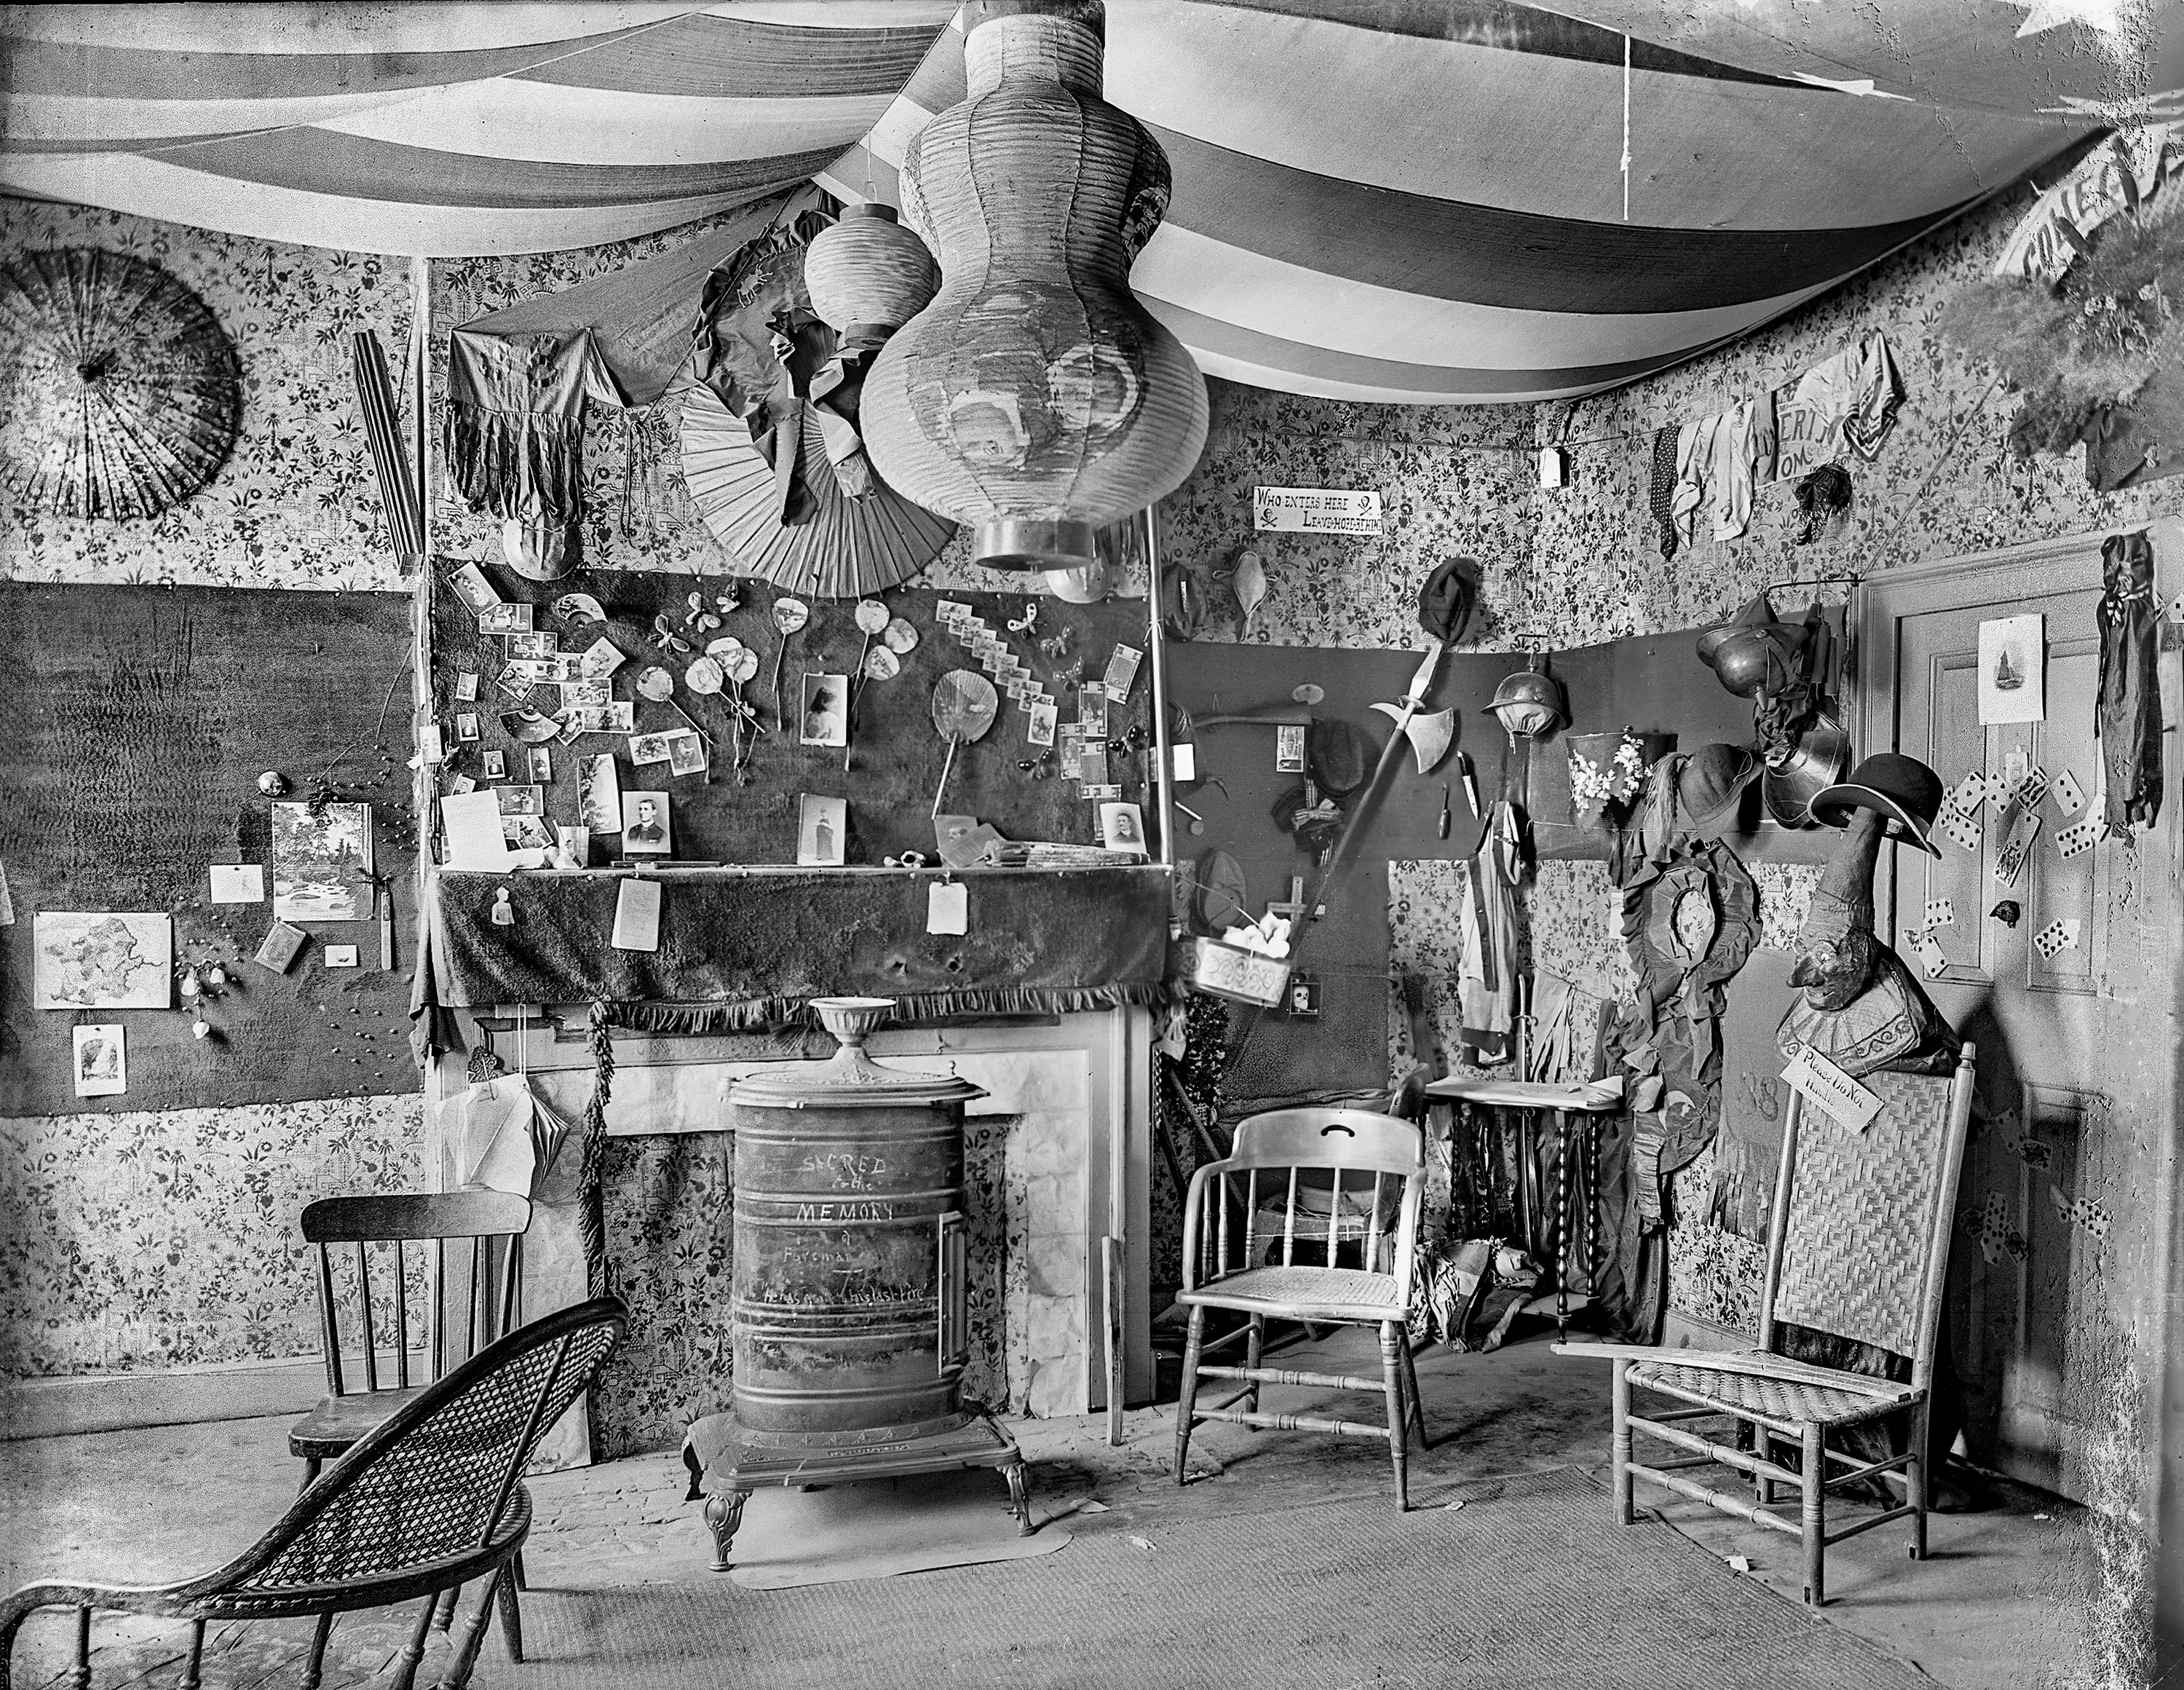 This room from well over a hundred years ago in Pawnee City, Nebraska, looks to have been the personal space of a boy or teenager. It's filled with weird little items a teenage boy might have found worth collecting. A handwritten sign on the wall says "WHO ENTERS HERE - LEAVE HOPE BEHIND". A large Punch and Judy puppet is mounted on a chair with a warning not to handle it. Playing cards decorate the walls. The scrawled message on the heating stove says "Sacred to the Memory of a Fireman - He has gone to his last fire". An American flag covers the ceiling. Browse around the room and see what you can find. It's his own private museum, the Voynich Manuscript of Victorian living space! Scanned from a 4x5 glass negative. View full size.